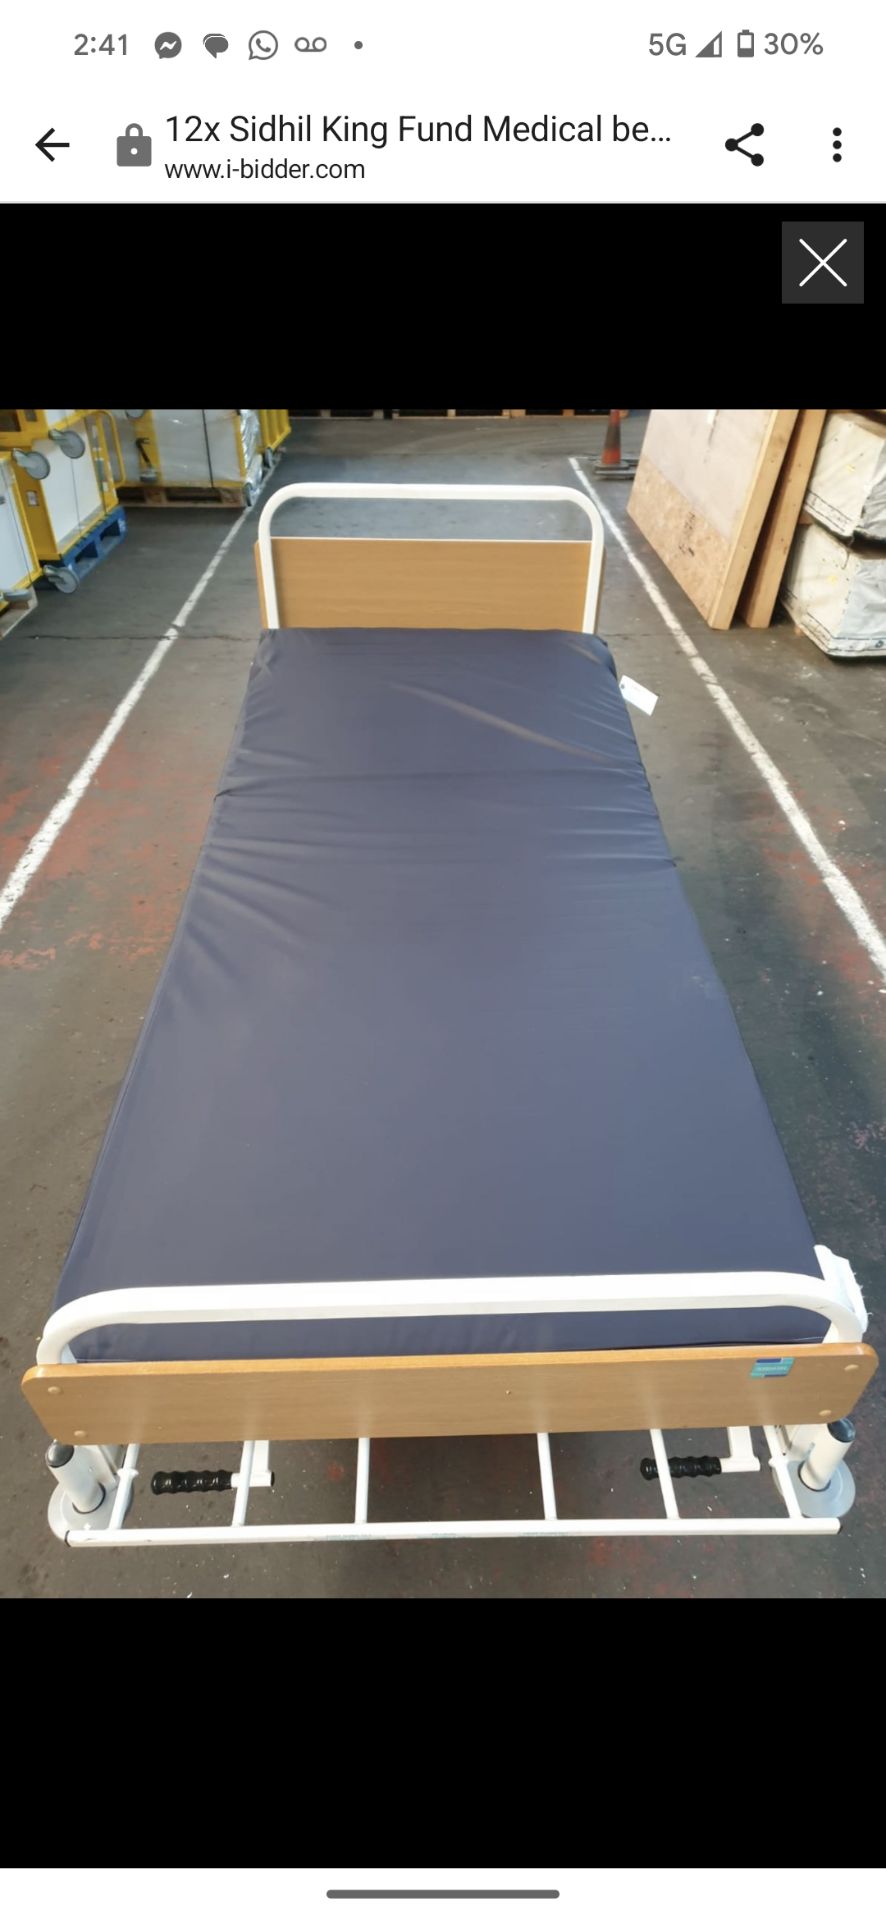 1 x Sidhil Kings Fund Hydraulic Hospital Bed With Mattress - Image 3 of 7